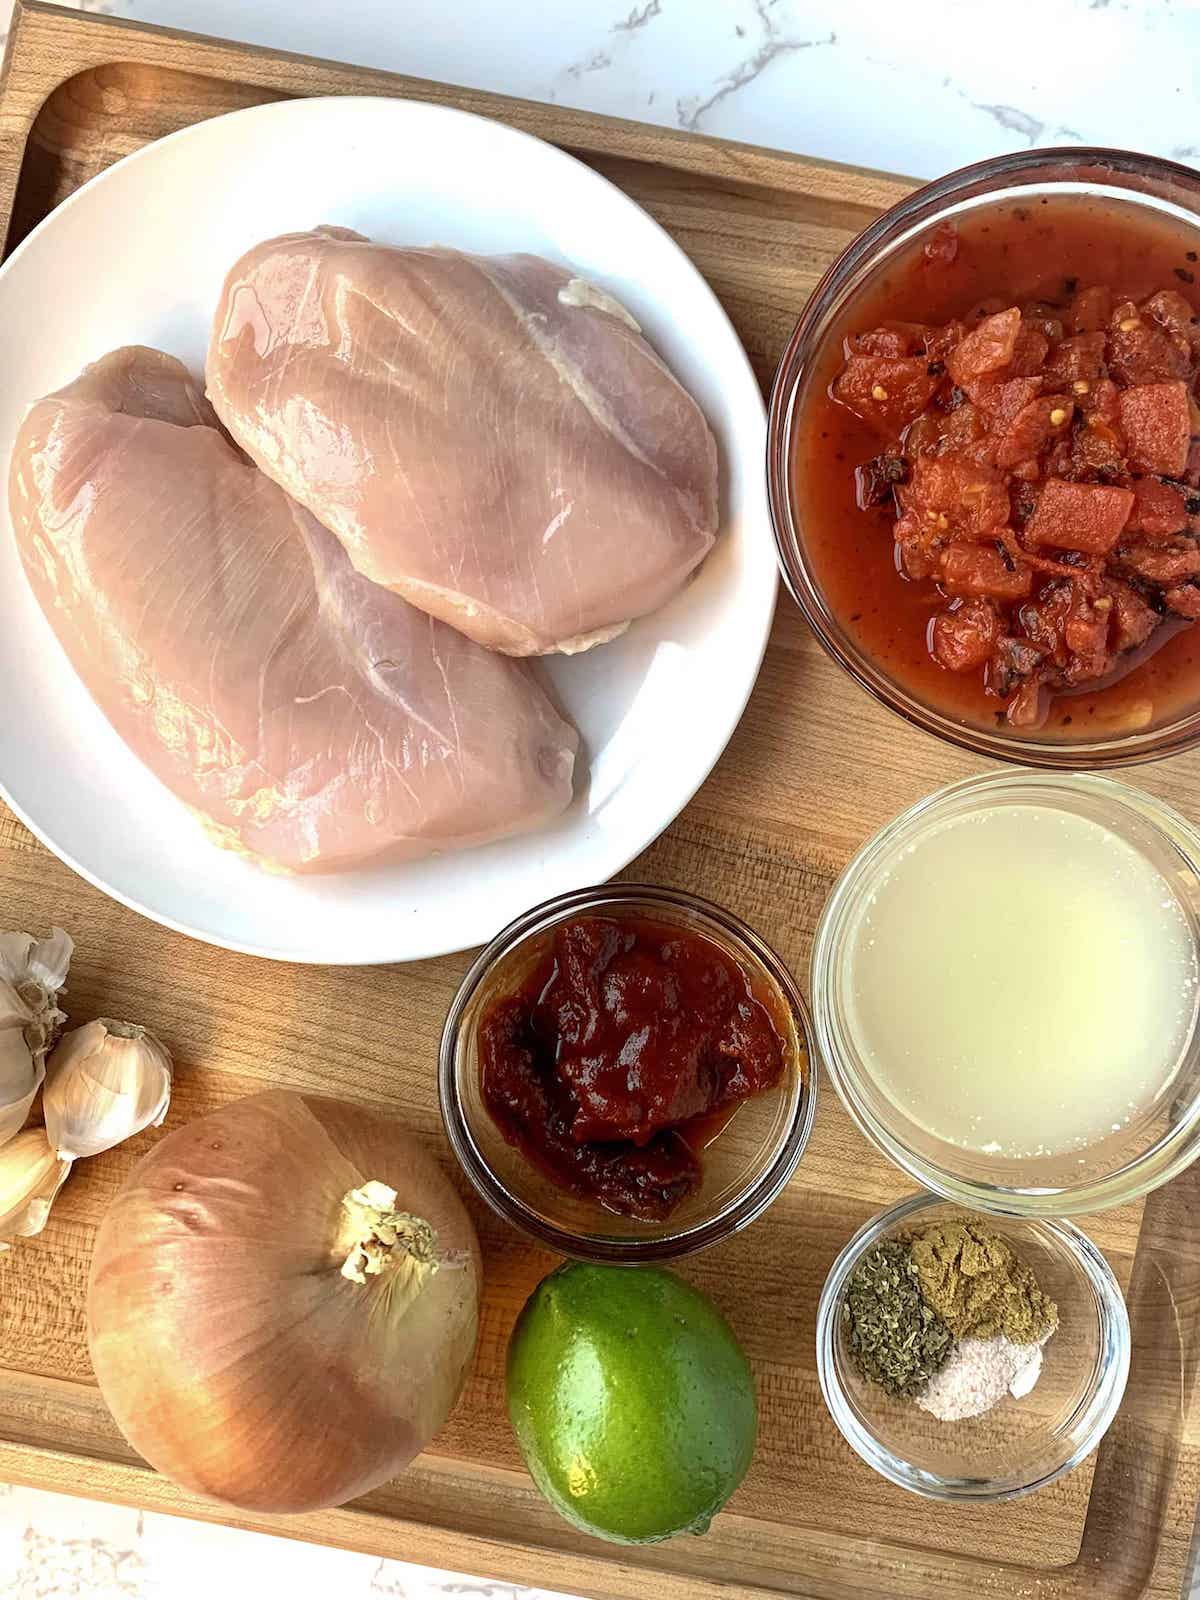 Ingredients for chicken tinga in small bowls on a wood cutting board with a white plate of raw boneless skinless chicken breasts.